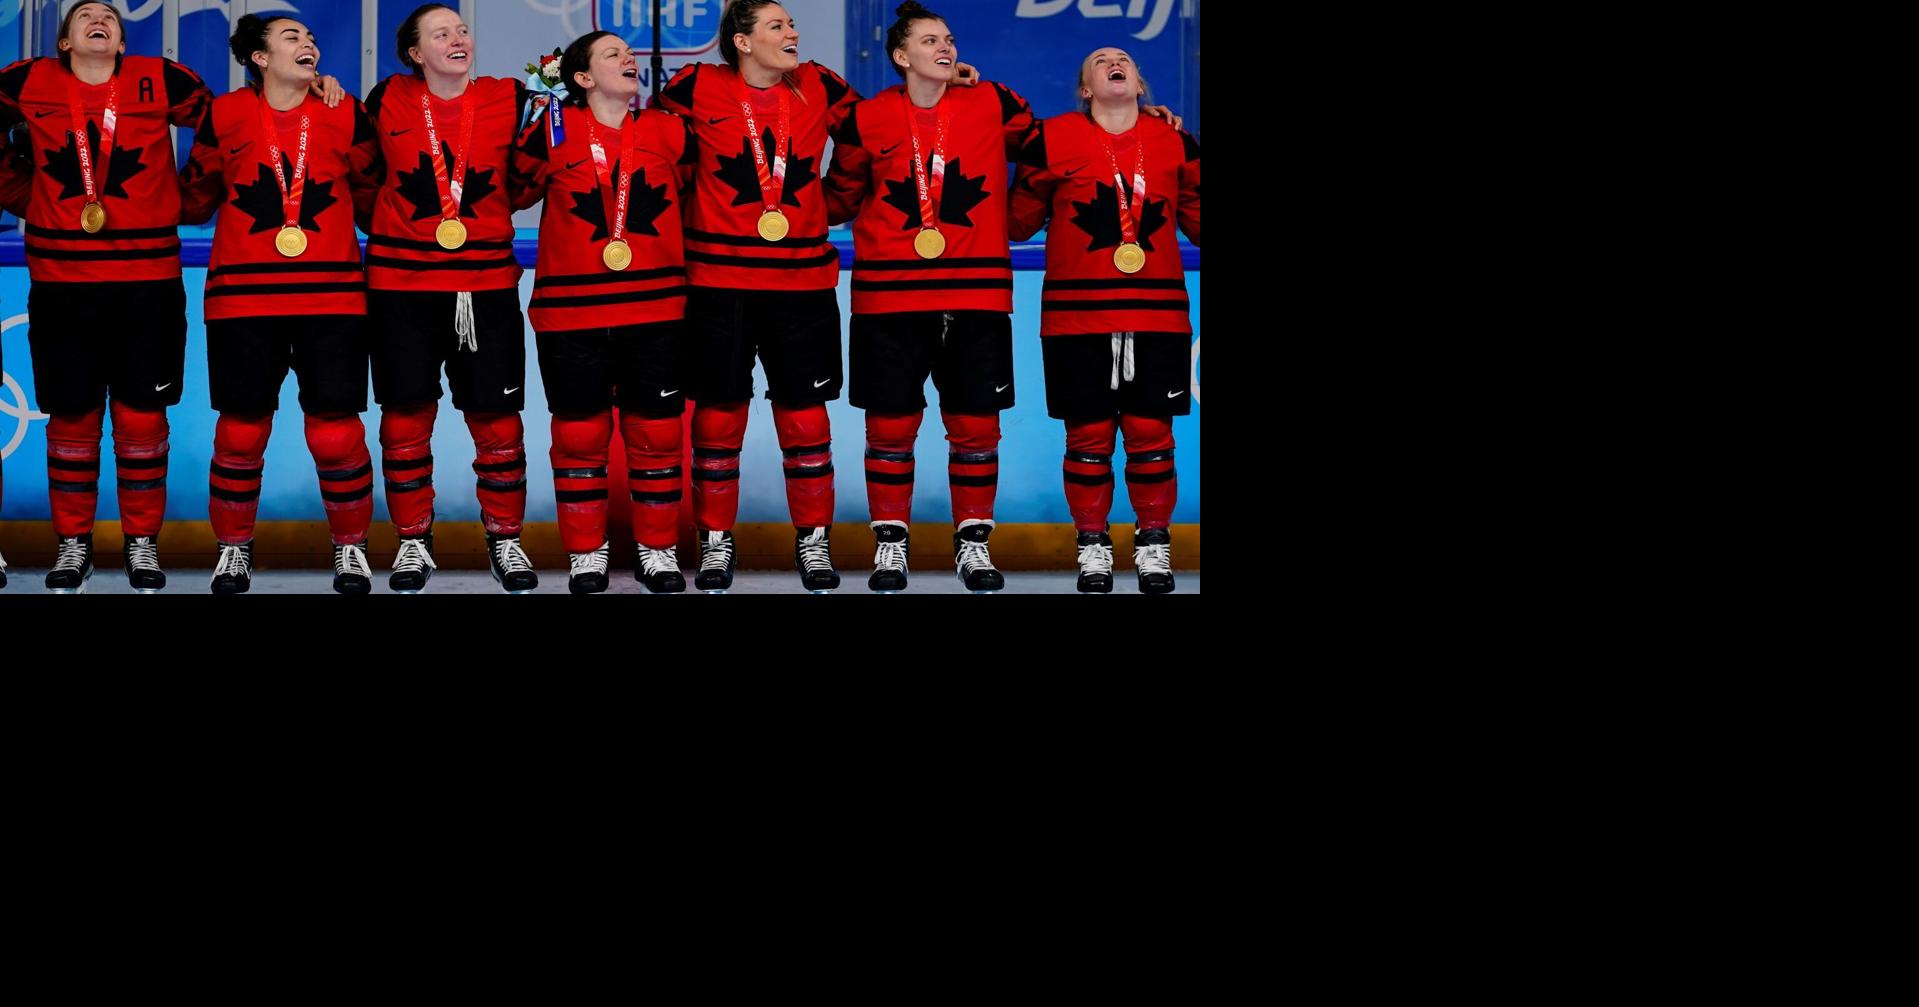 33) Canada beats old rival USA 3-2 to win gold in women's ice hockey final